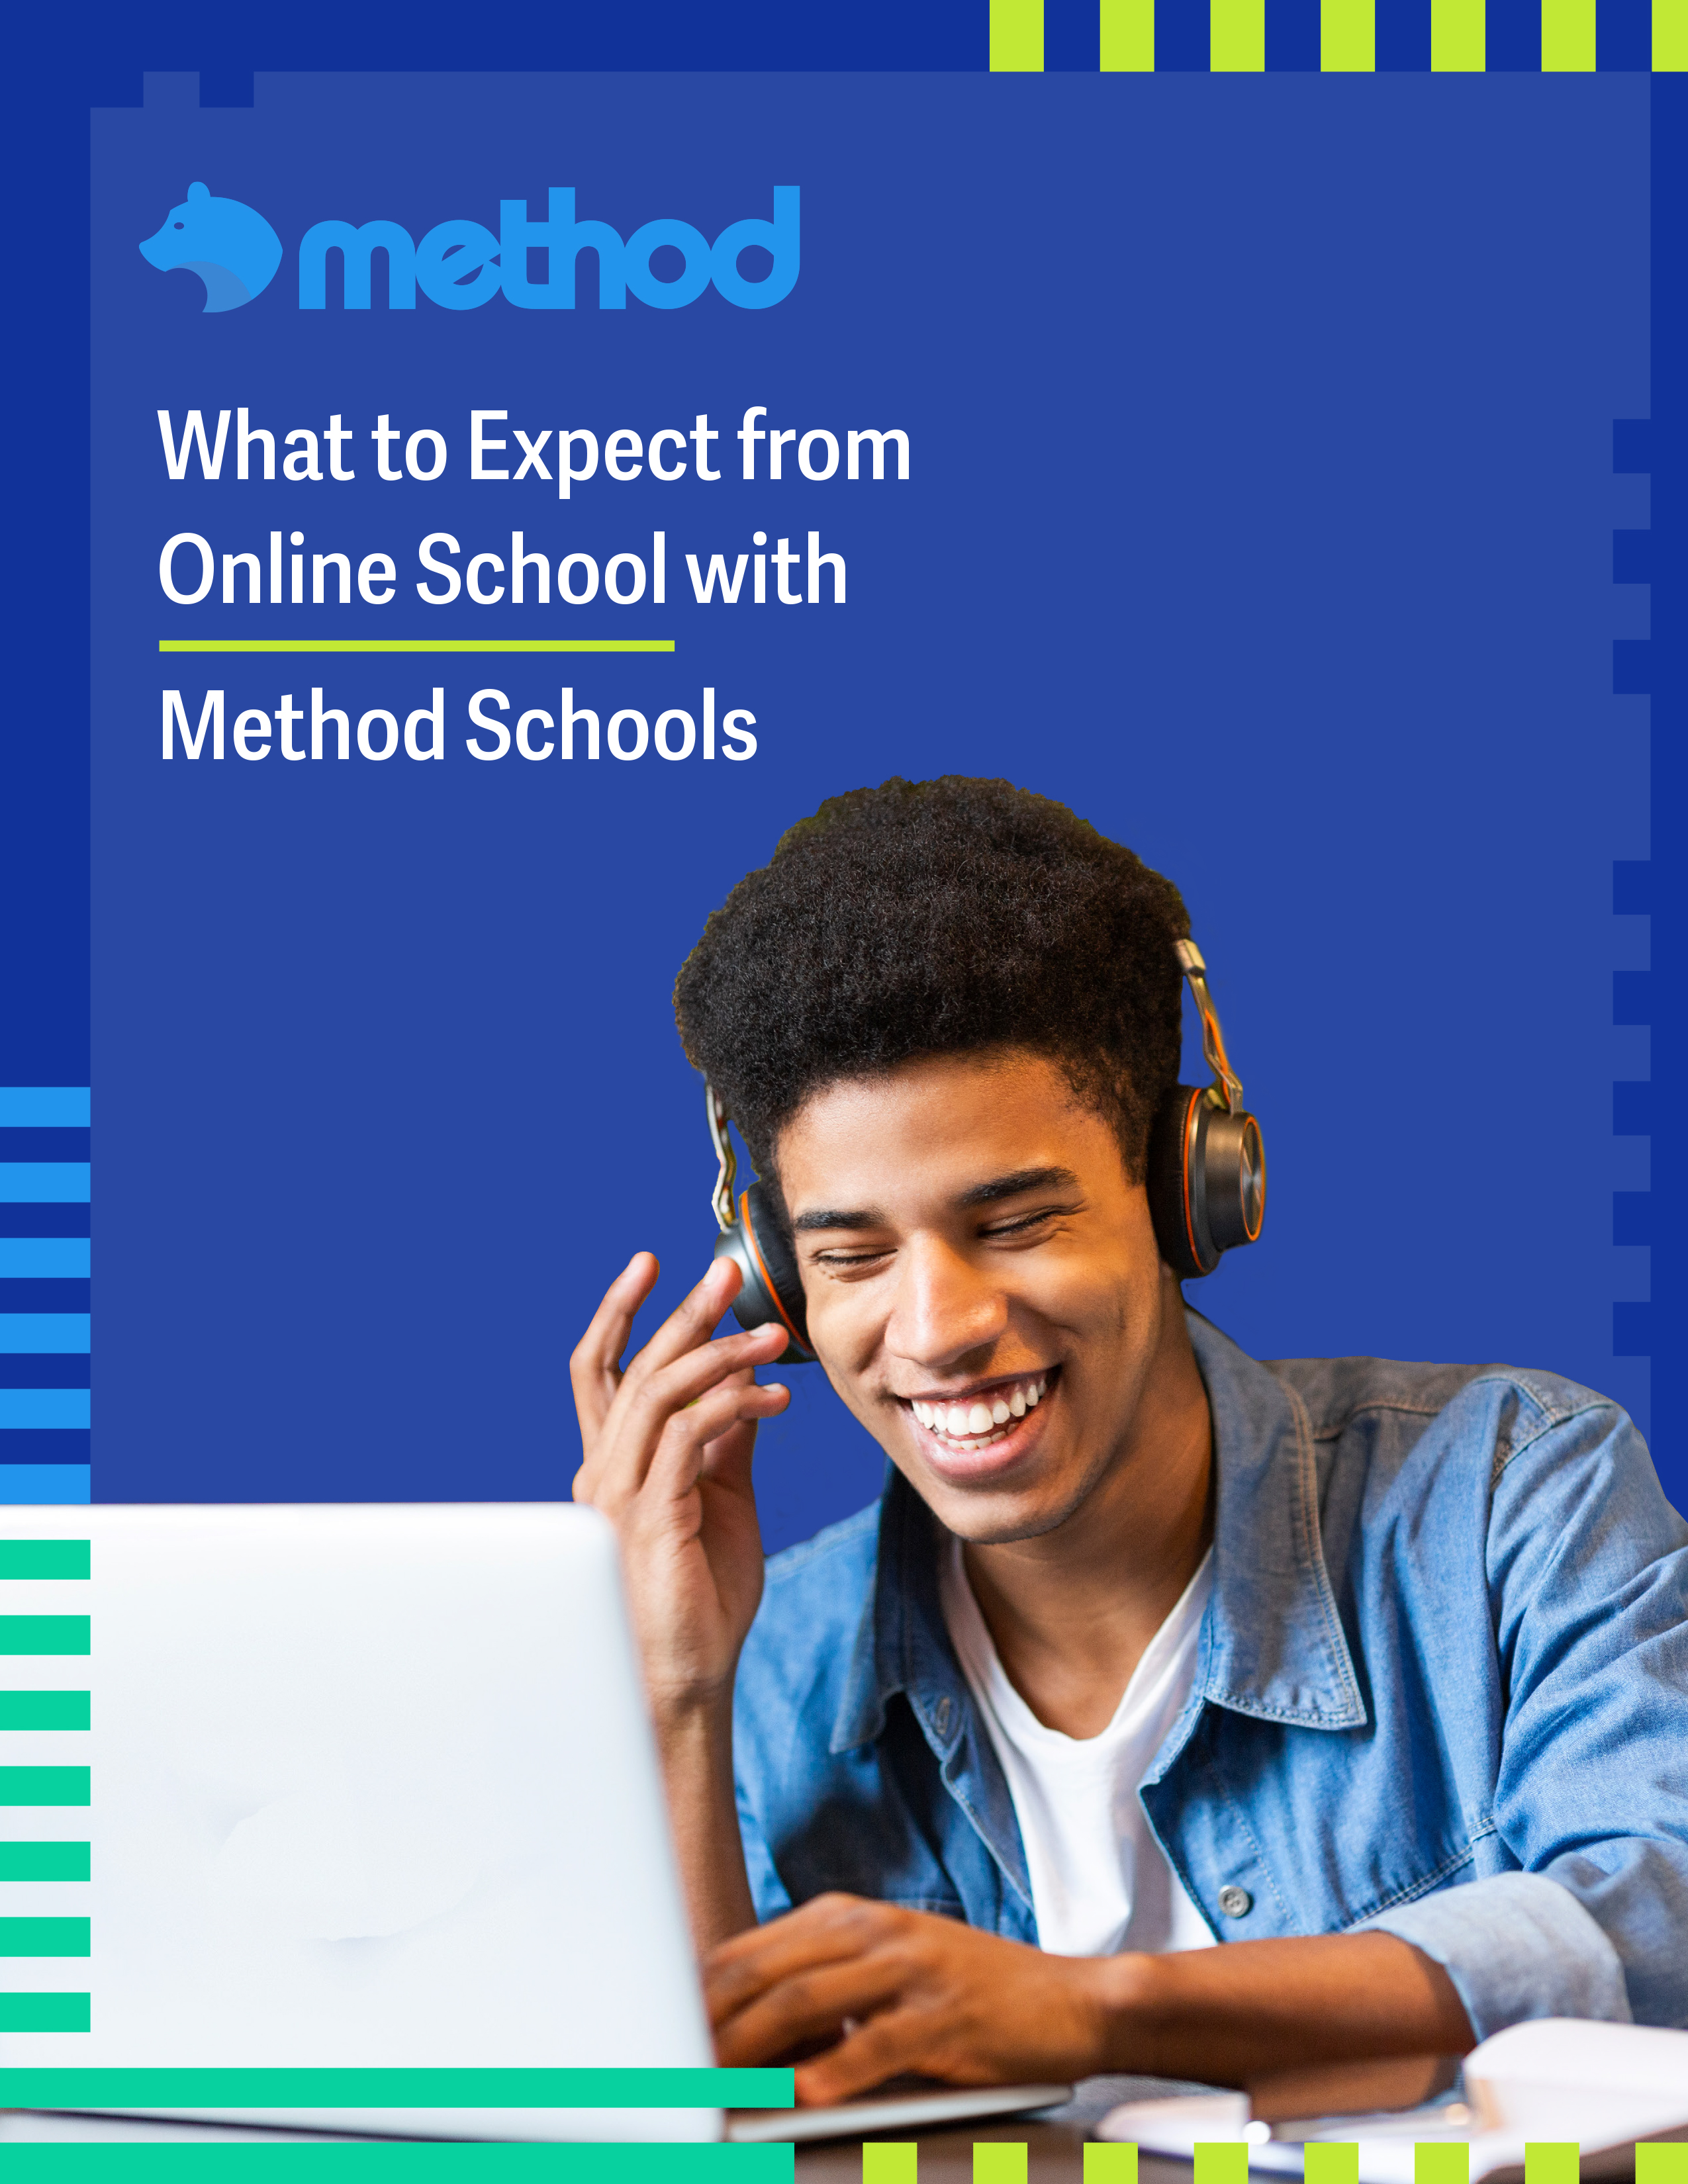 18. Contextual Thought Leadership - Download What to Expect from Online School with Method Schools 